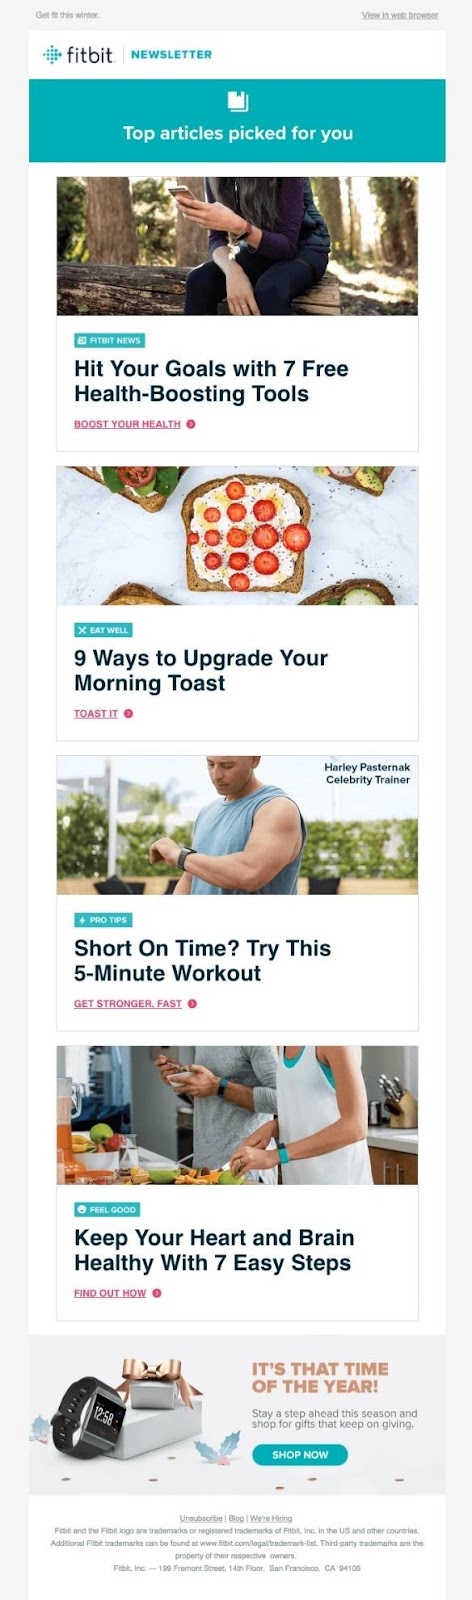 Fitbit did a great job of putting together some of their favorite tips and tricks in the following email.